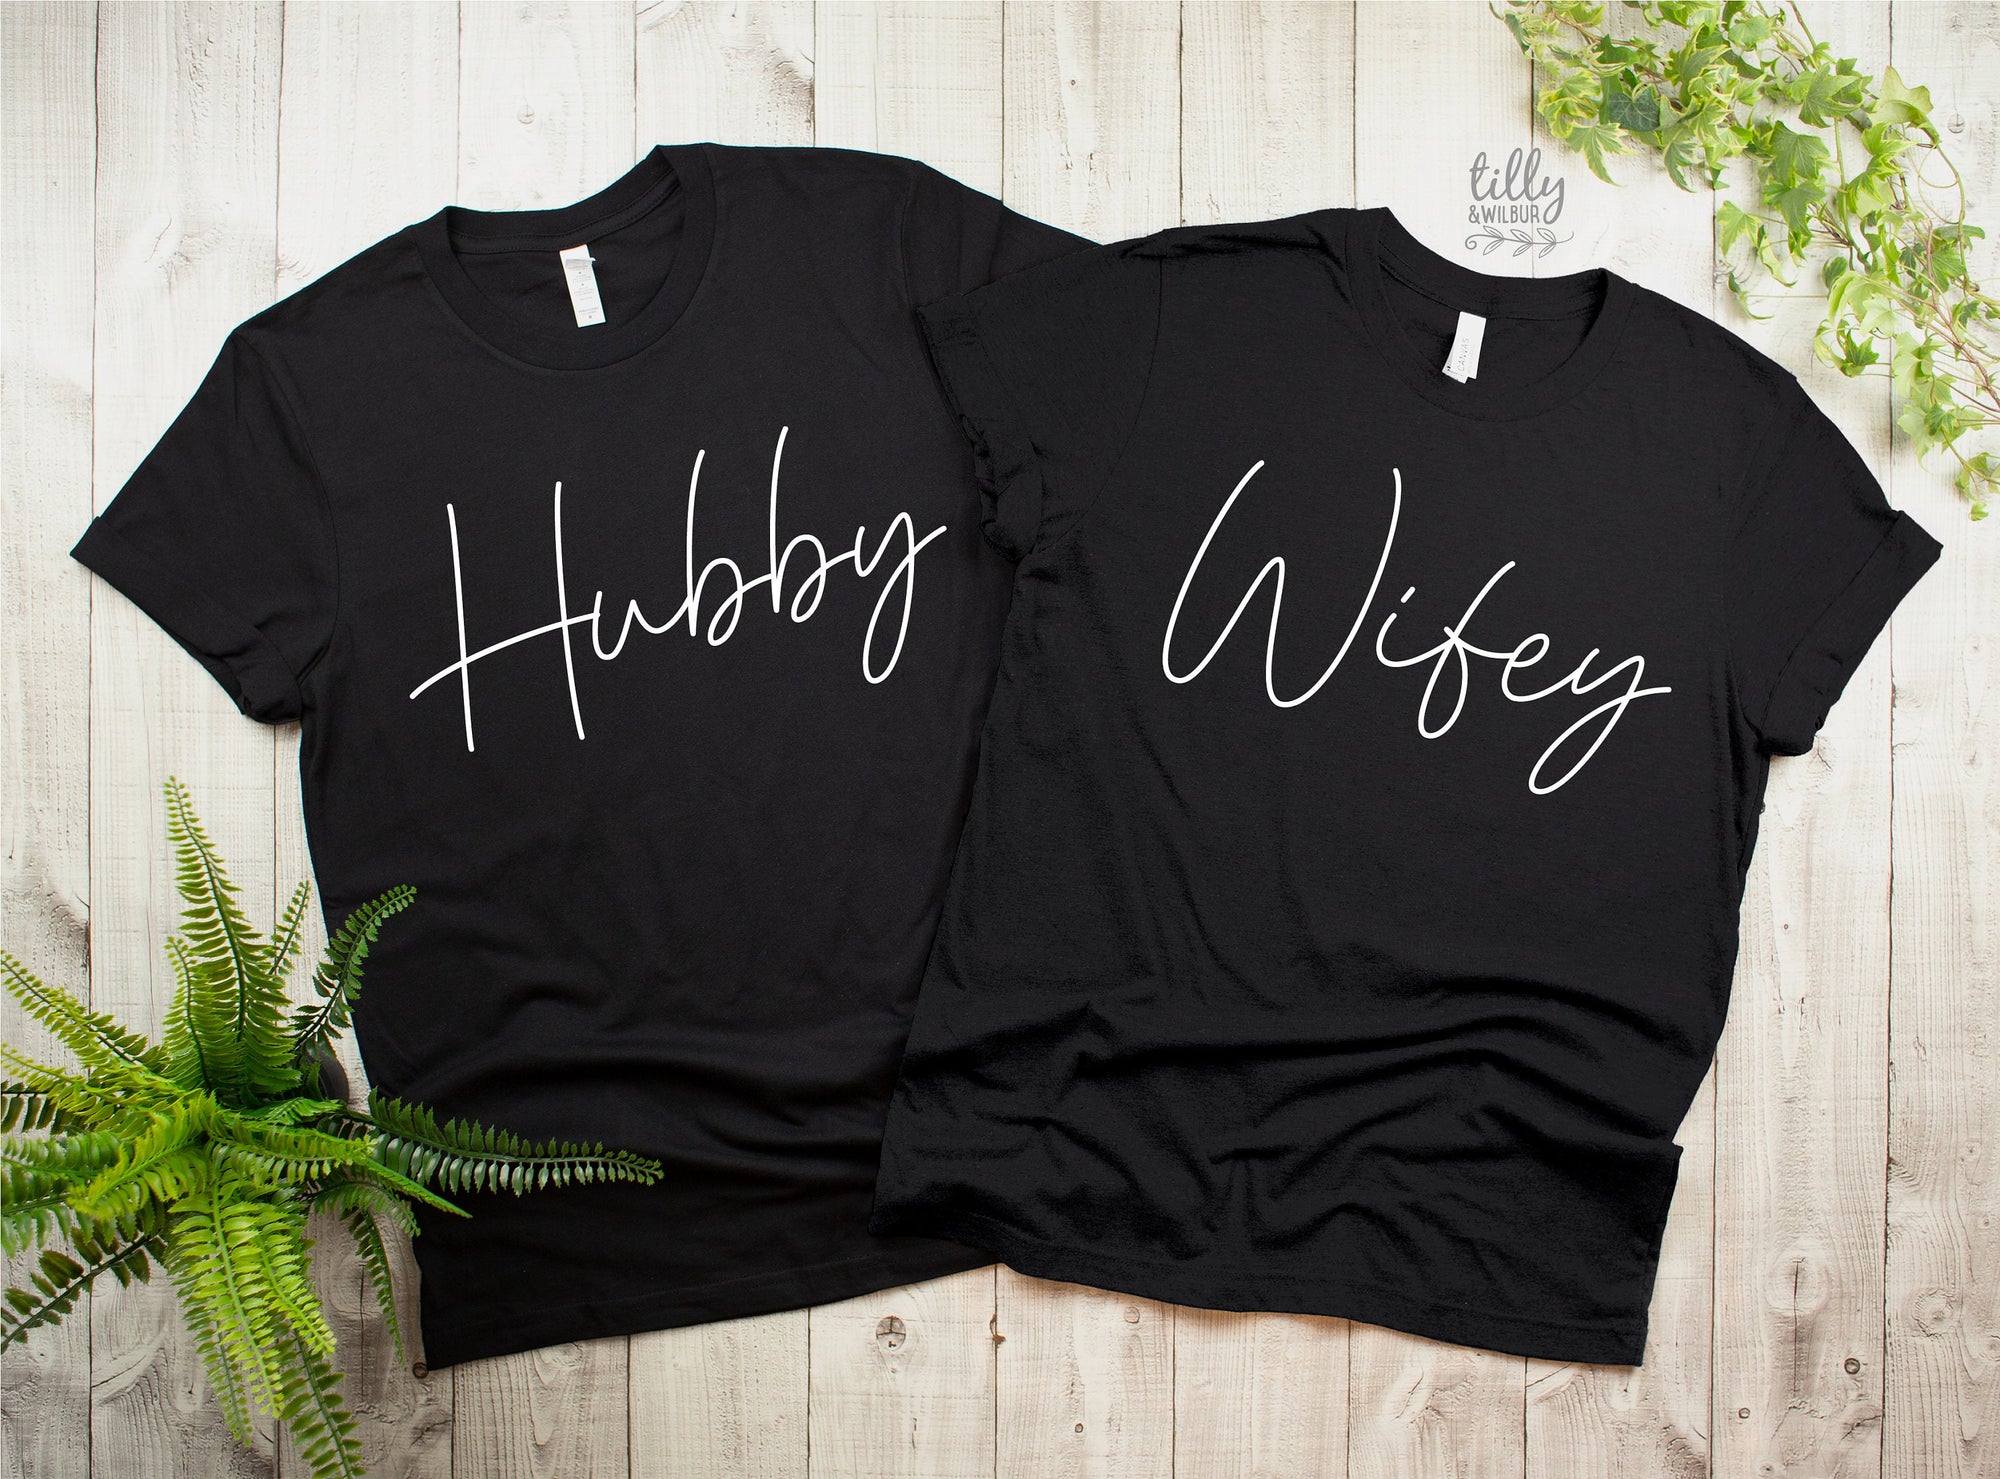 Hubby And Wifey Matching T-Shirts, Mr And Mrs Matching T-Shirts, Newlywed T-Shirts, Honeymoon T-Shirts, Wedding Gift, His and Hers Clothing